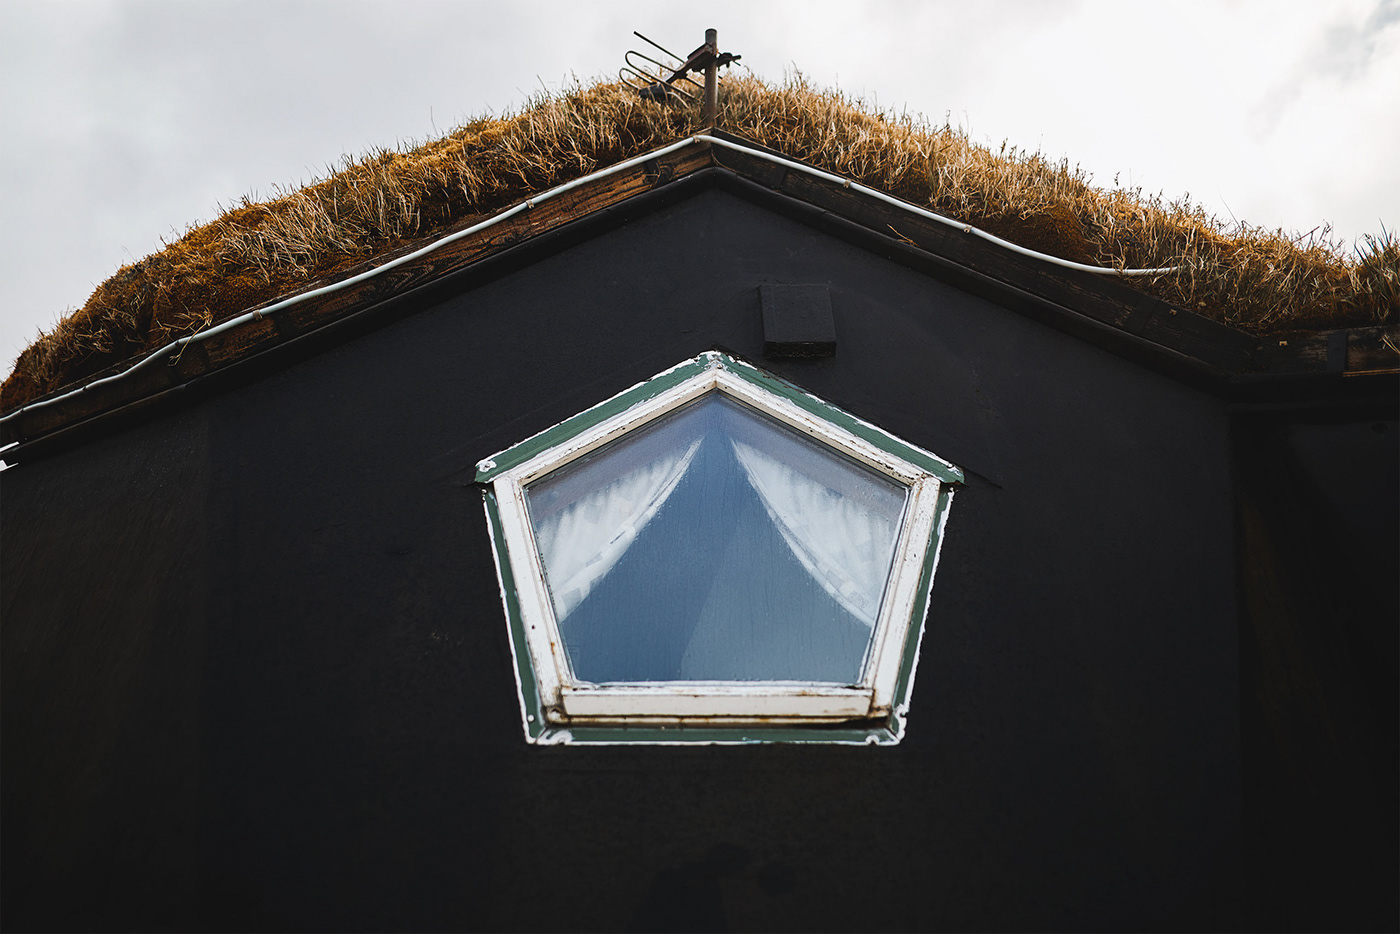 altrath architecture denmark domes faroer islands islands Landscape Photography  tinyhouse house